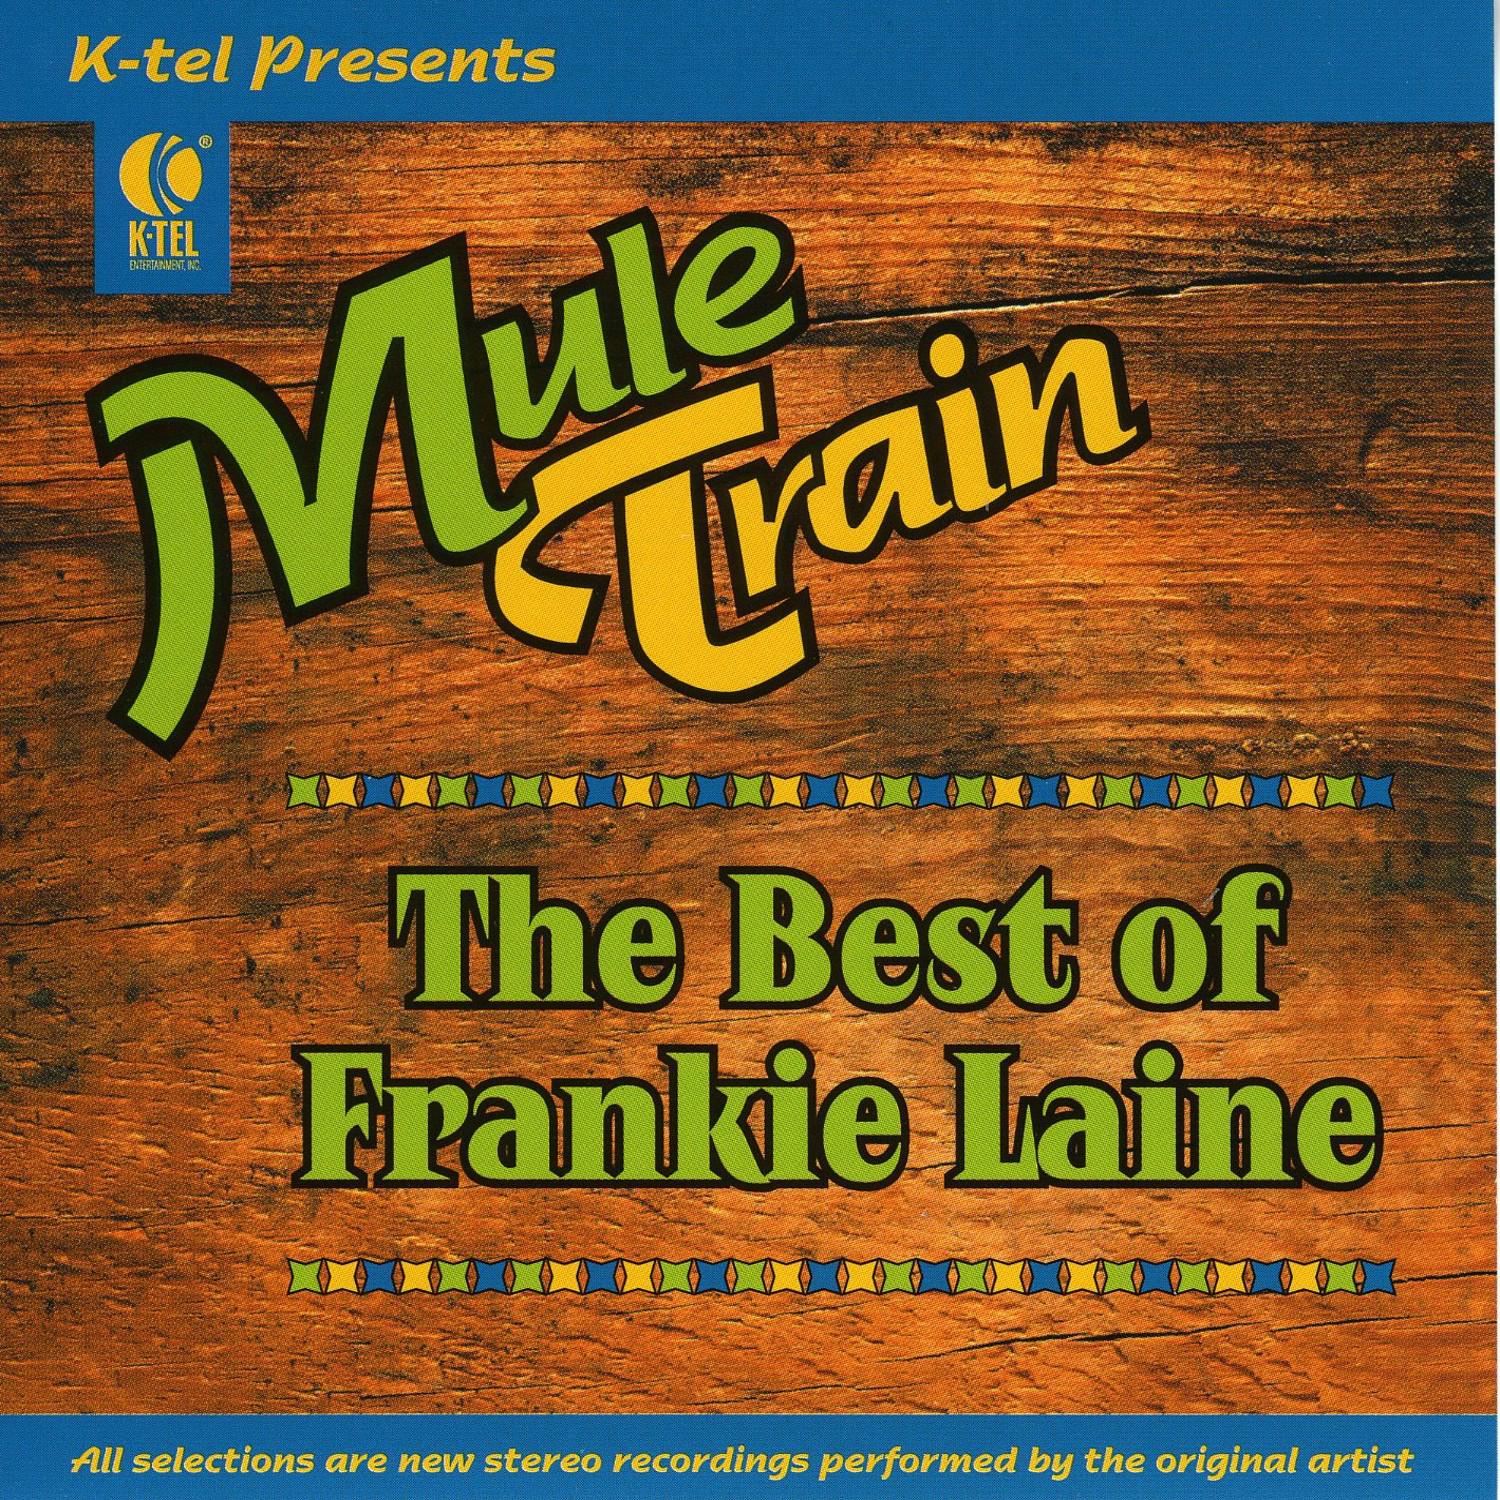 The Best Of Frankie Laine - Mule Train